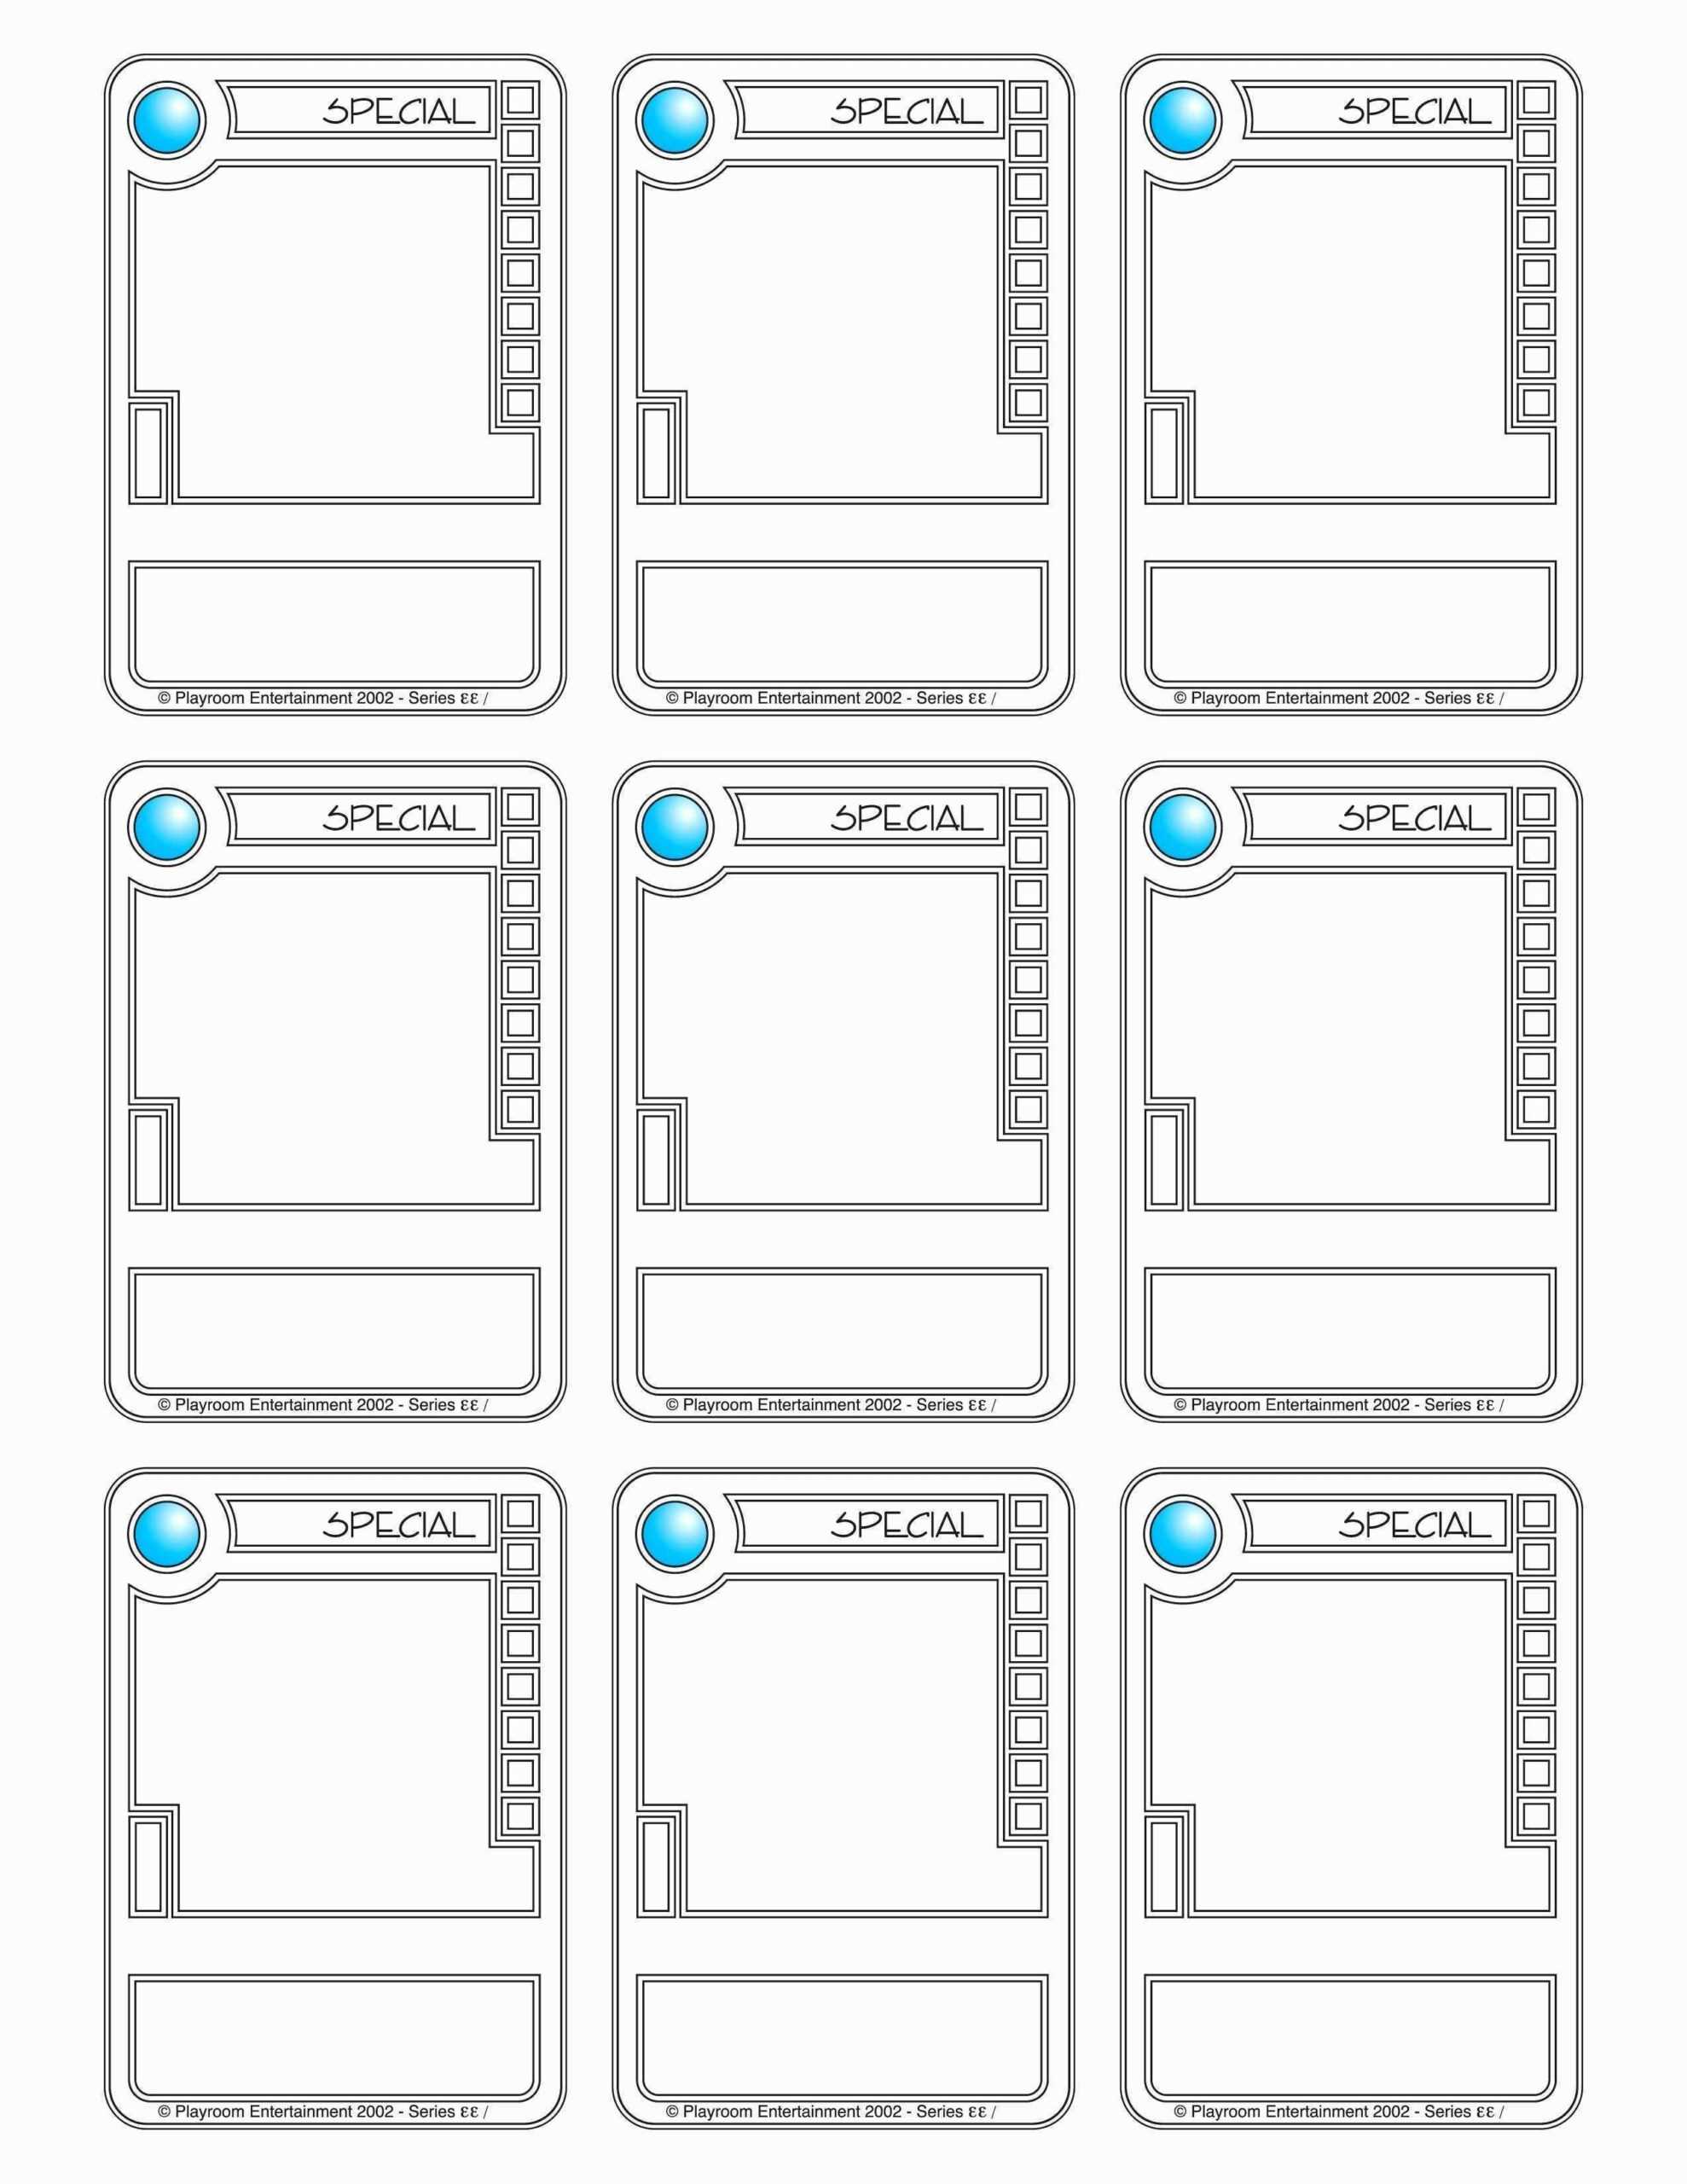 001 Trading Card Maker Free Examples Template For Success In Throughout Card Game Template Maker